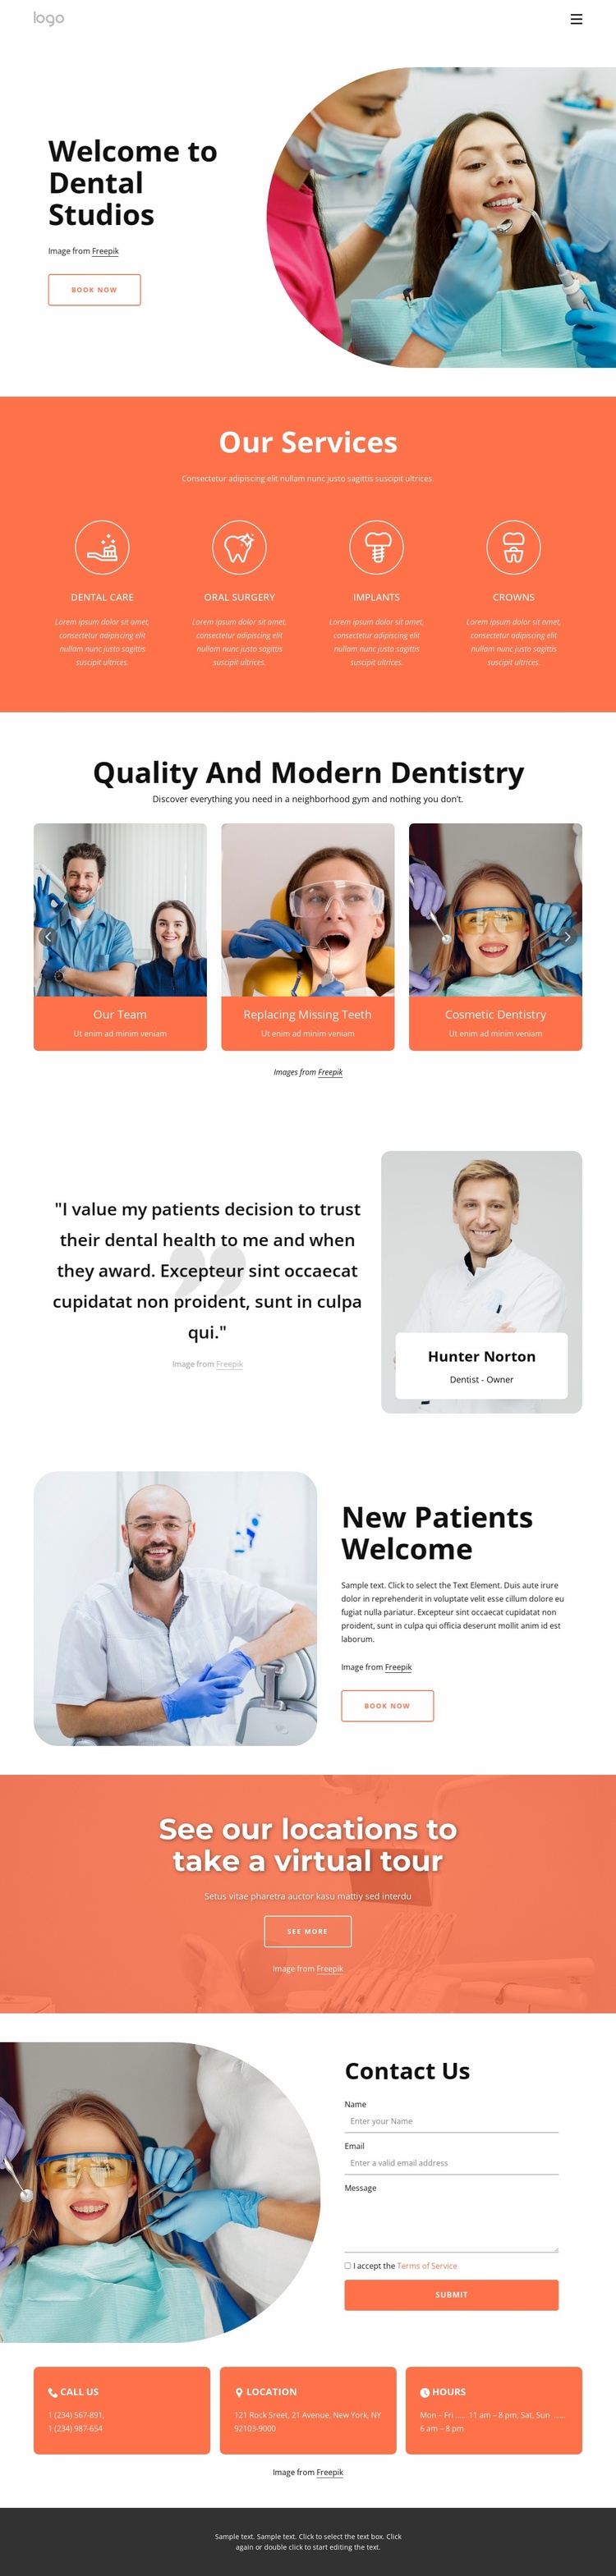 Welcome to dental studios Landing Page